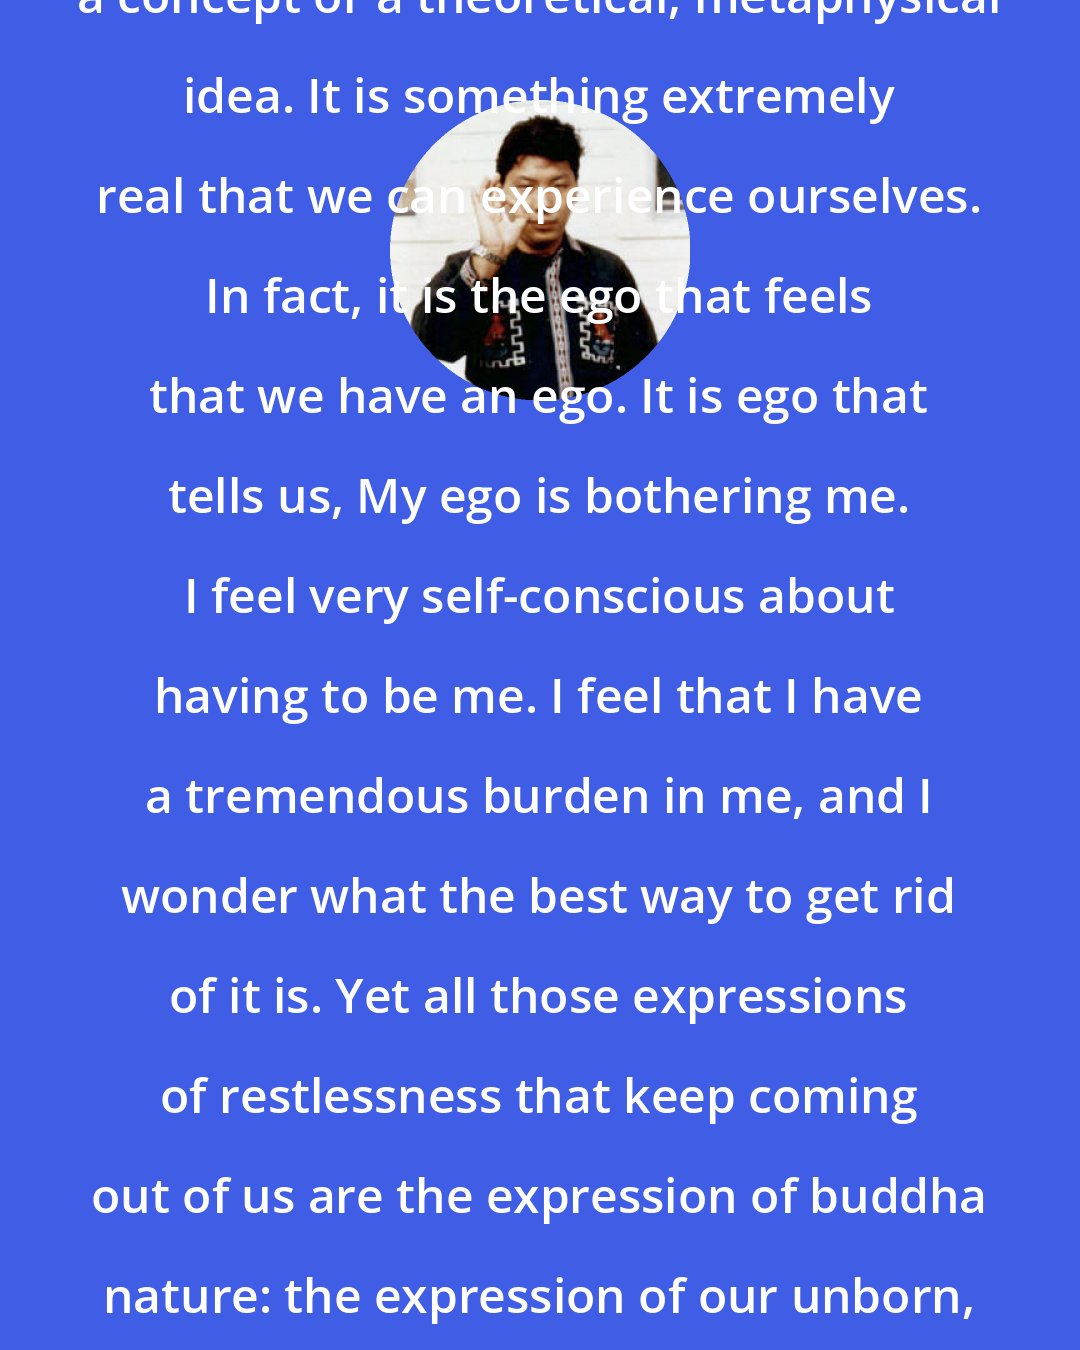 Chogyam Trungpa: The idea of buddha mind is not purely a concept or a theoretical, metaphysical idea. It is something extremely real that we can experience ourselves. In fact, it is the ego that feels that we have an ego. It is ego that tells us, My ego is bothering me. I feel very self-conscious about having to be me. I feel that I have a tremendous burden in me, and I wonder what the best way to get rid of it is. Yet all those expressions of restlessness that keep coming out of us are the expression of buddha nature: the expression of our unborn, unobstructed, and nondwelling nature.